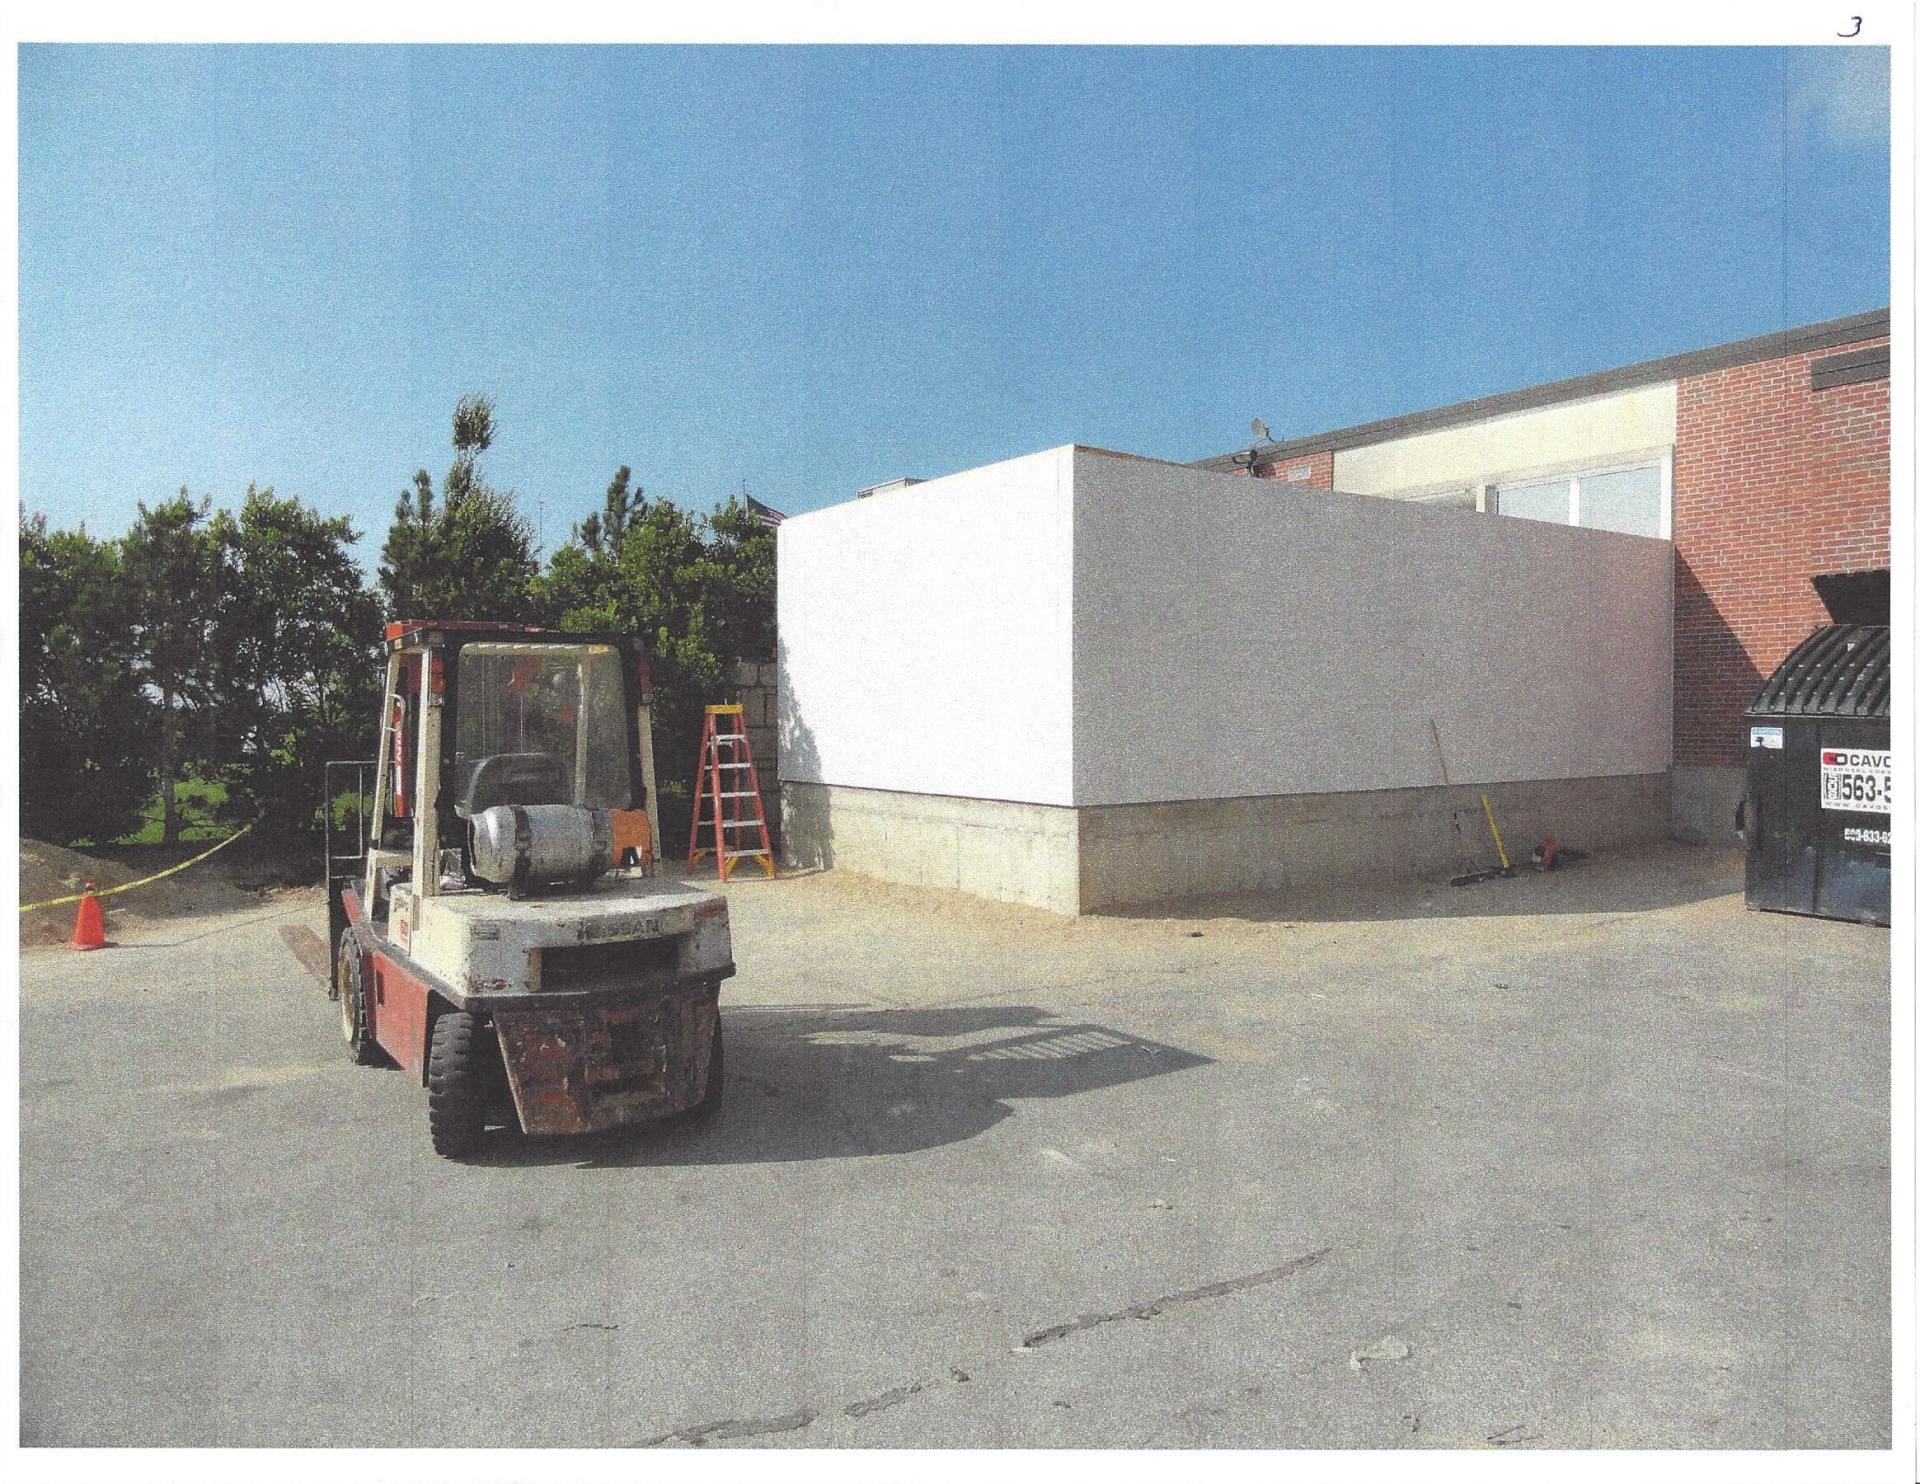 Moving vehicle - Commercial Refrigeration in Taunton, MA